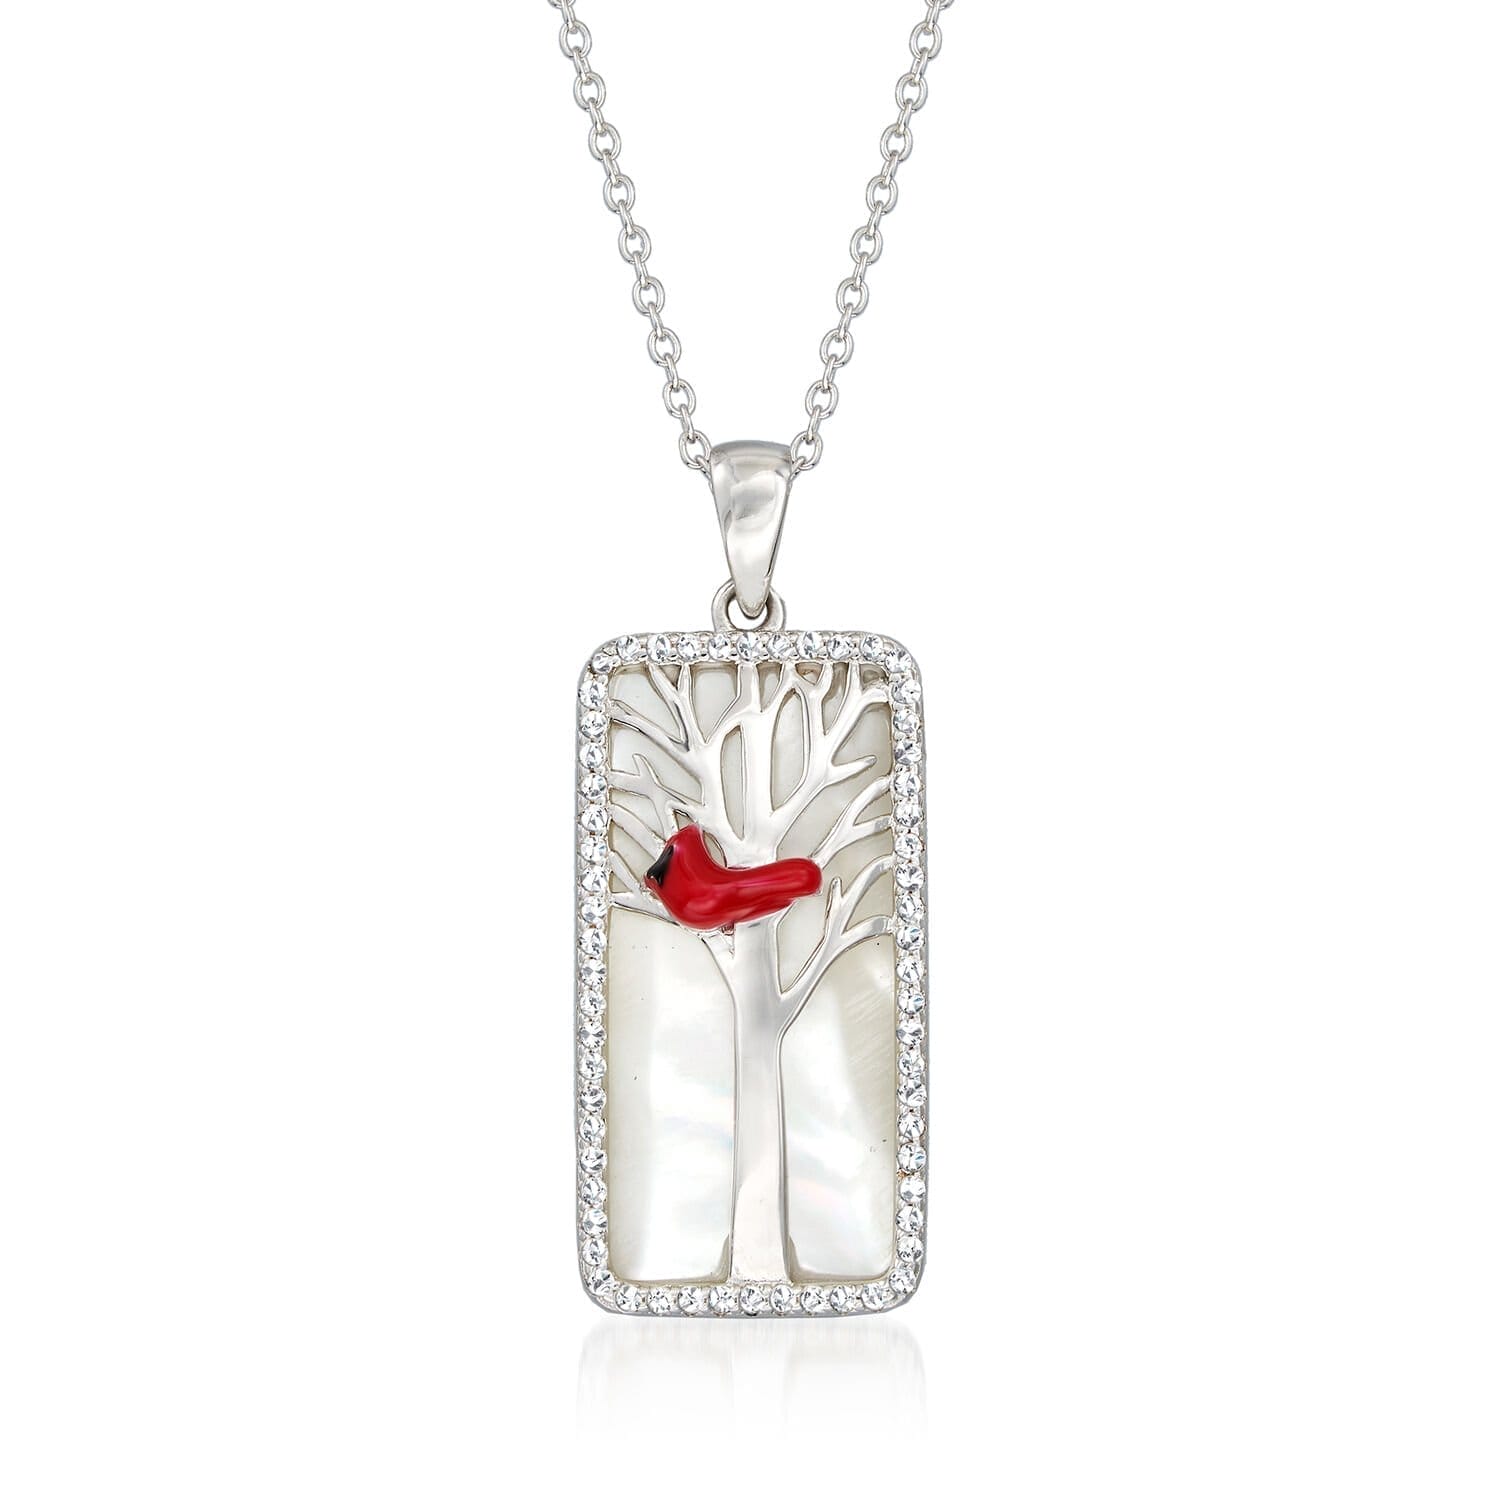 Mother-of-Pearl, .30ct t.w. White Topaz Cardinal Pendant Necklace, Multicolored Enamel. 18"